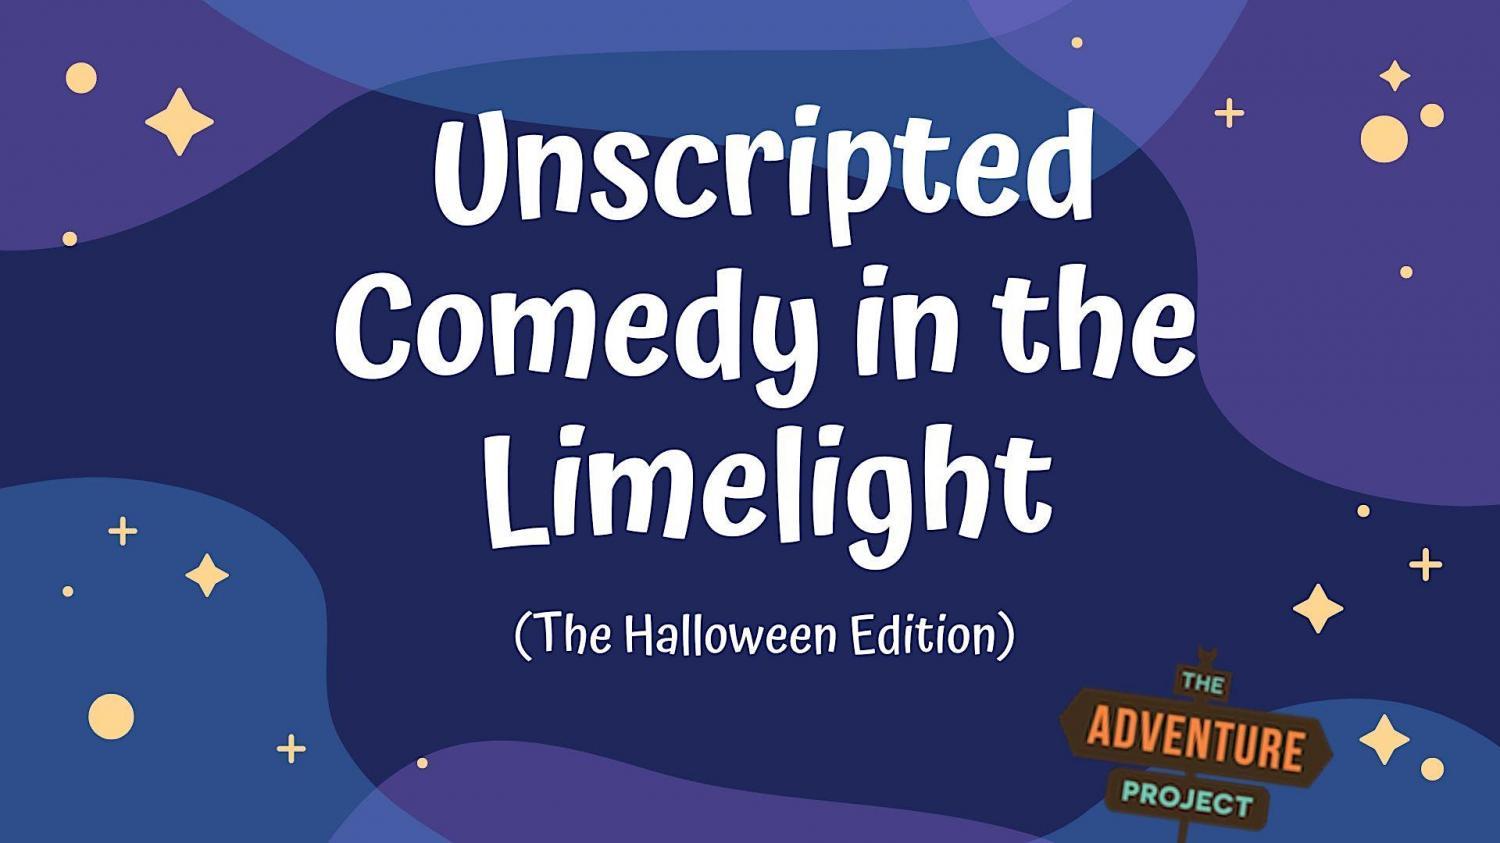 Unscripted Comedy in the Limelight - the Halloween Edition
Sun Oct 23, 7:00 PM - Sun Oct 23, 7:00 PM
in 3 days